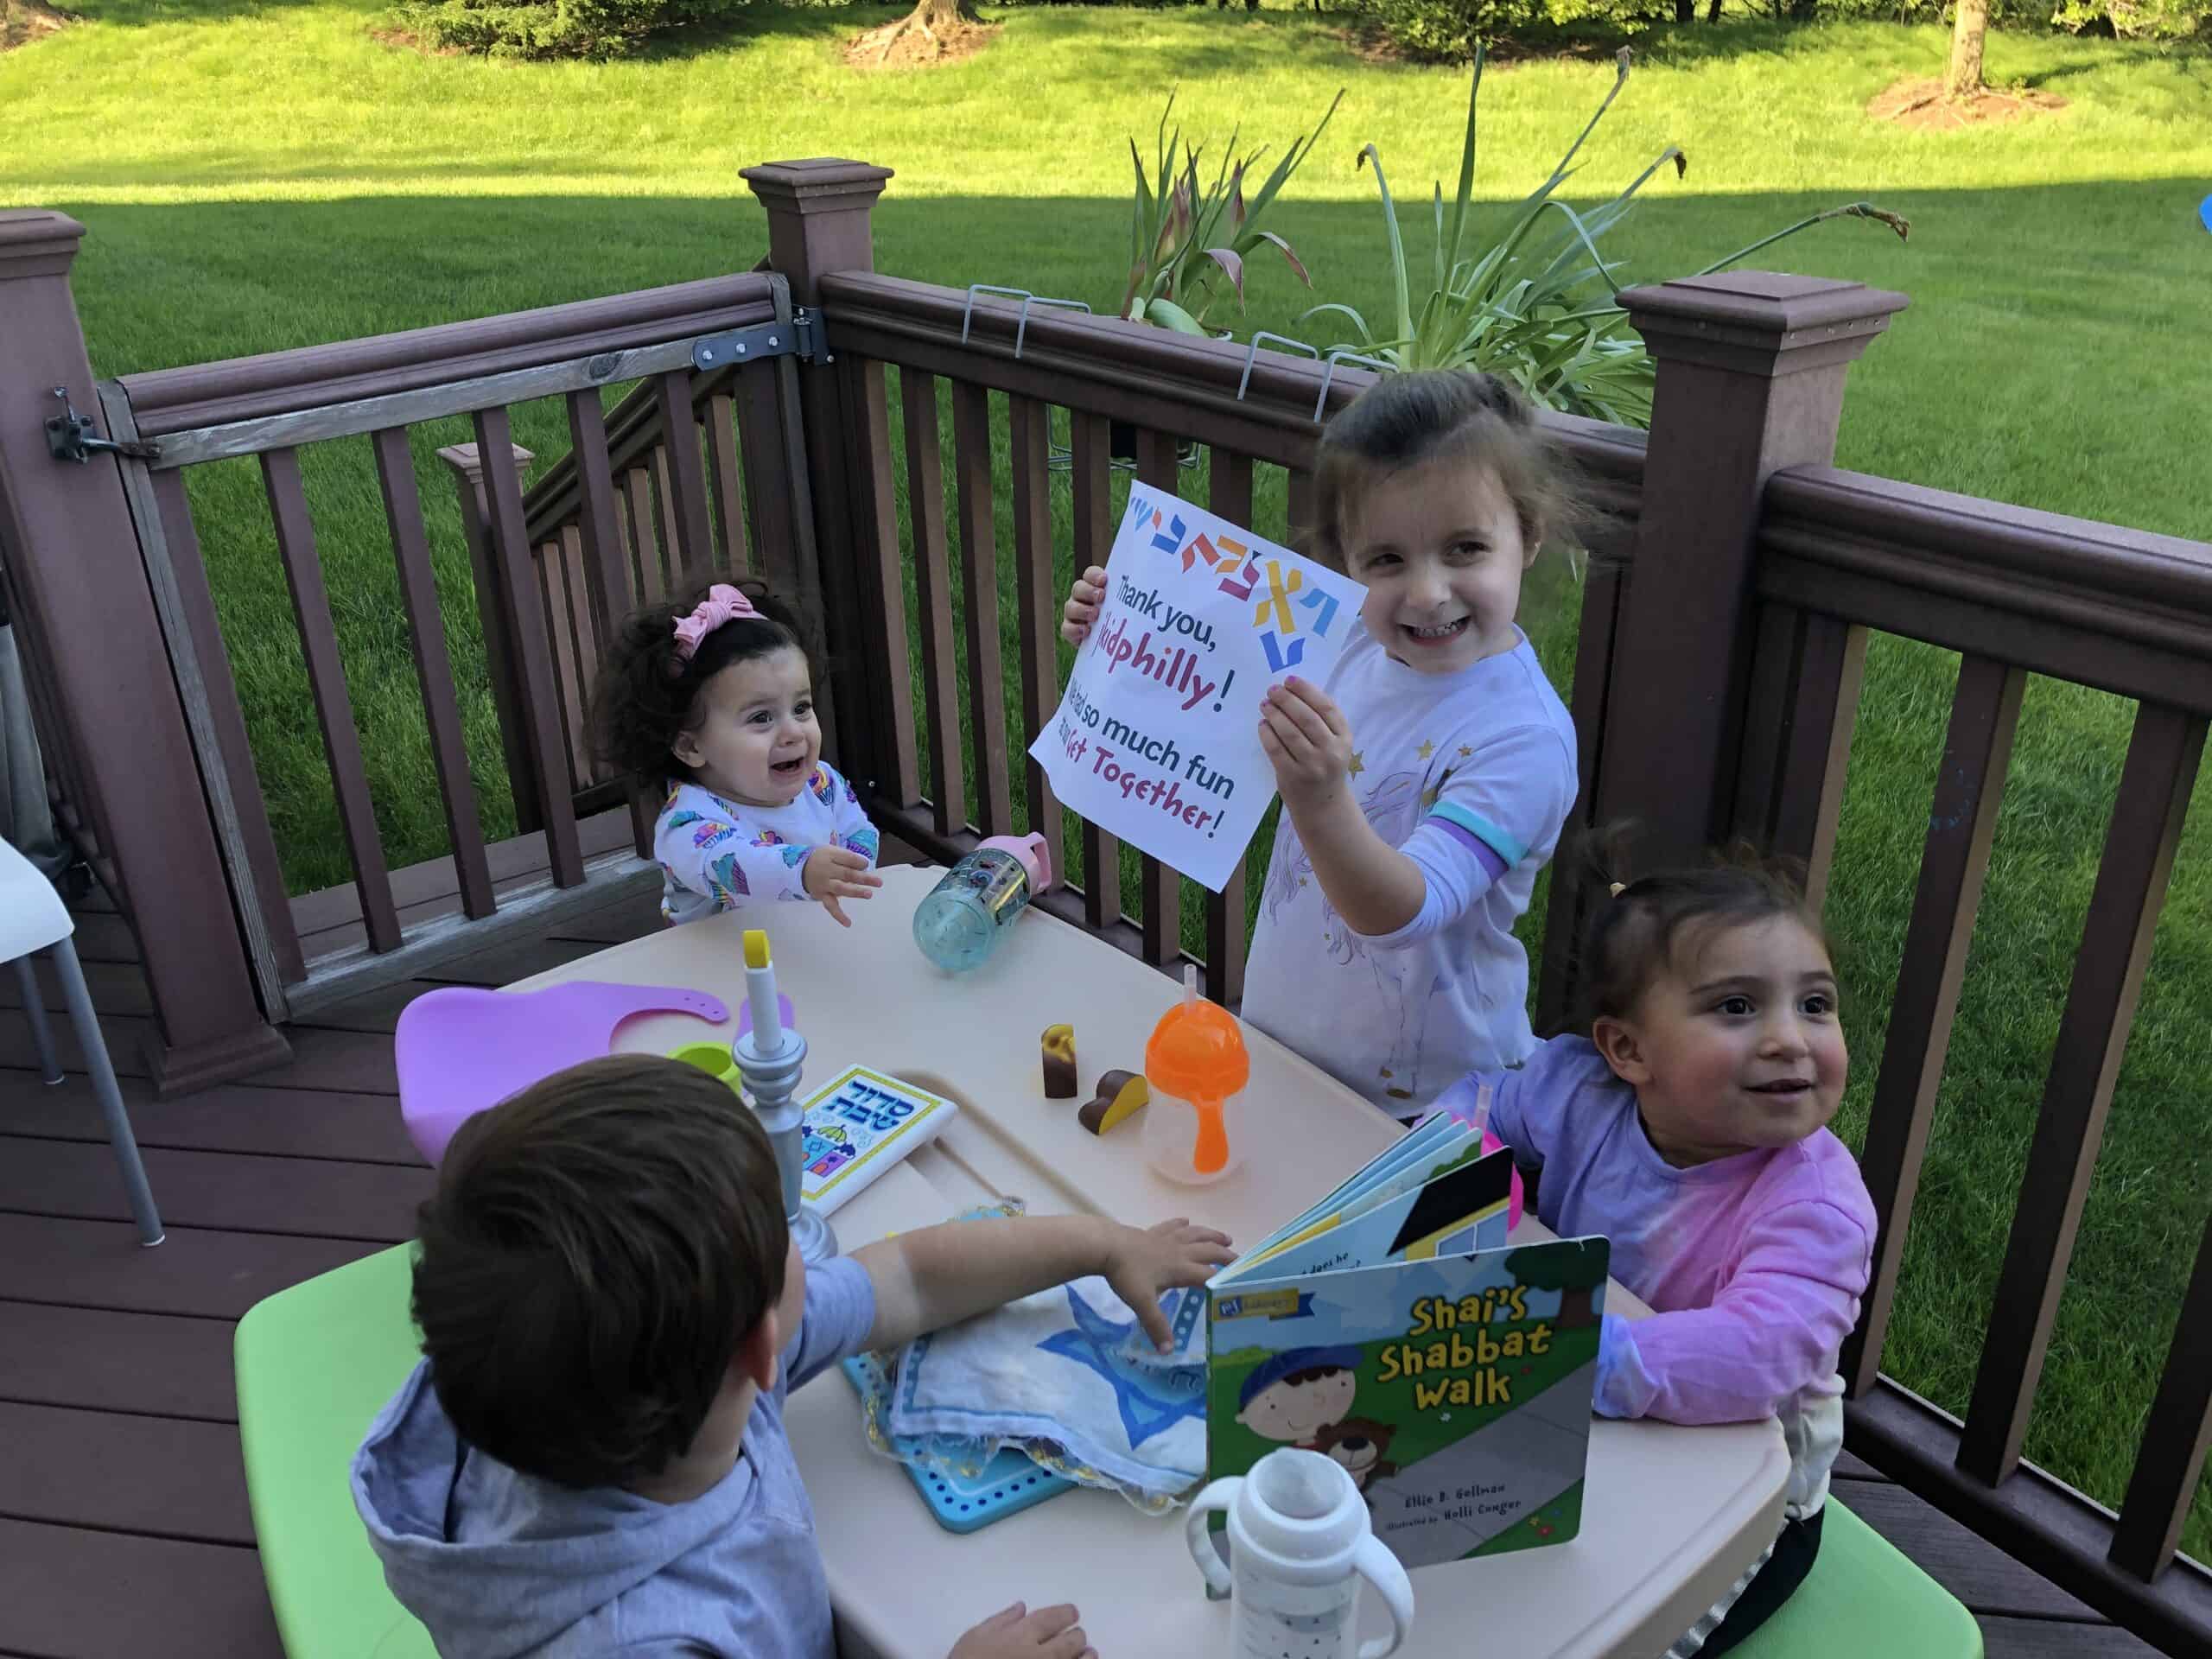 A photo of four toddlers sitting around a table covered in toy versions of Shabbat supplies, next to the book Shai's Shabbat Walk. One of the toddlers is holding a sign that says, Thanks jkidphilly, we had so much fun at our Get Together.